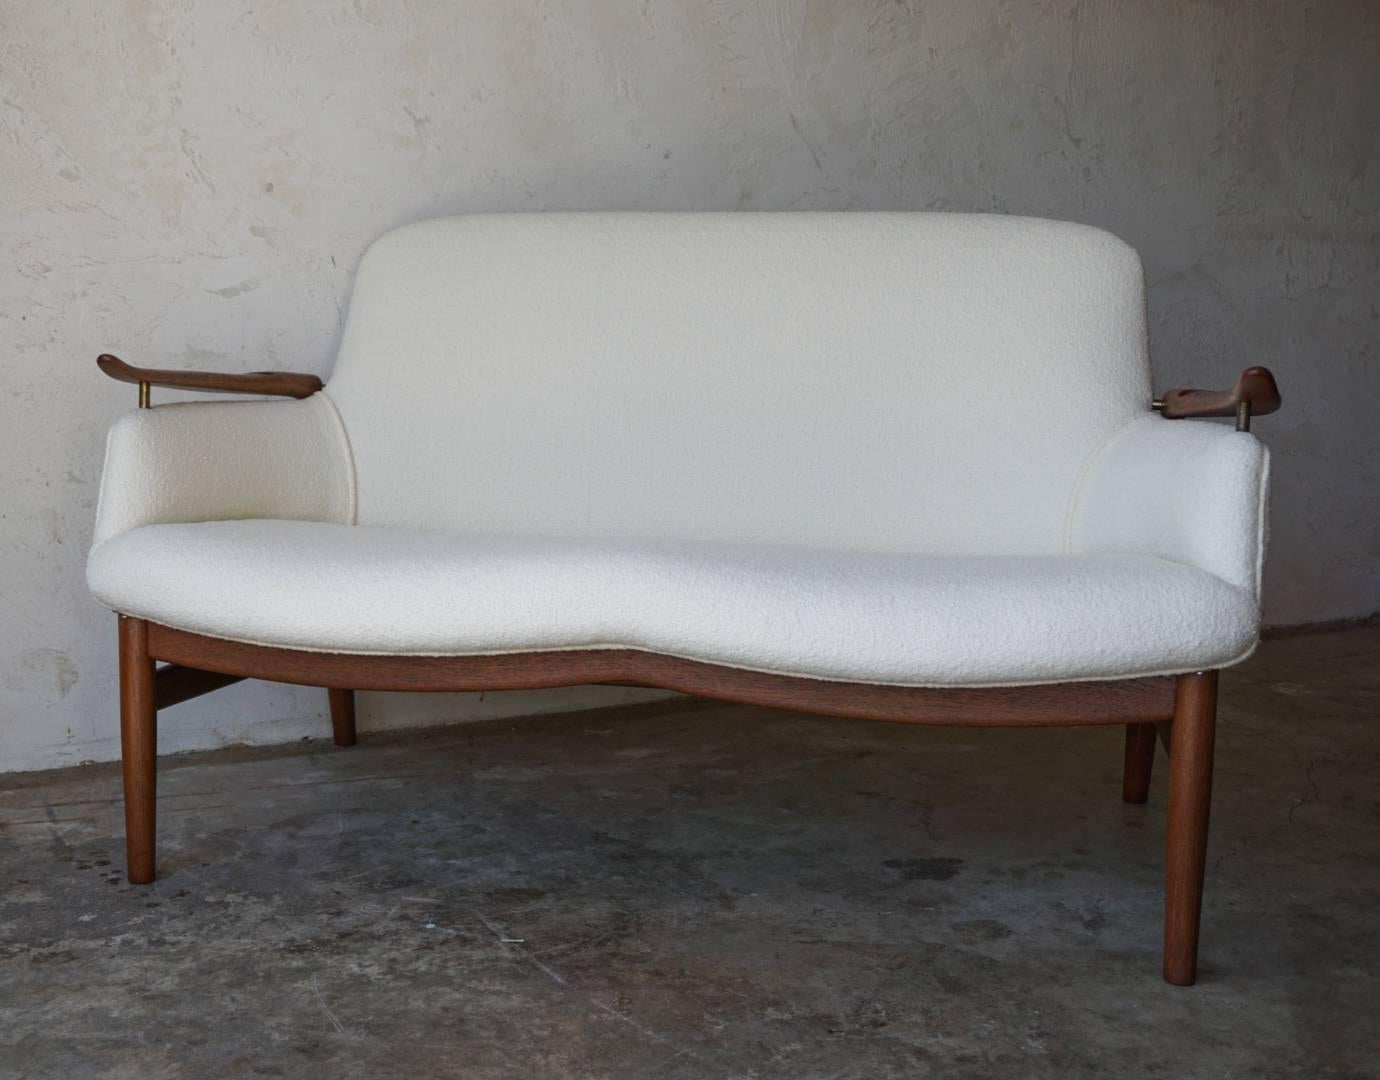 Rare NV53 settee designed by Finn Juhl for Niels Vodder, circa 1950s. Beautiful sculpted teak arms with brass details, newly restored in a pearl-colored Knoll bouclé fabric.